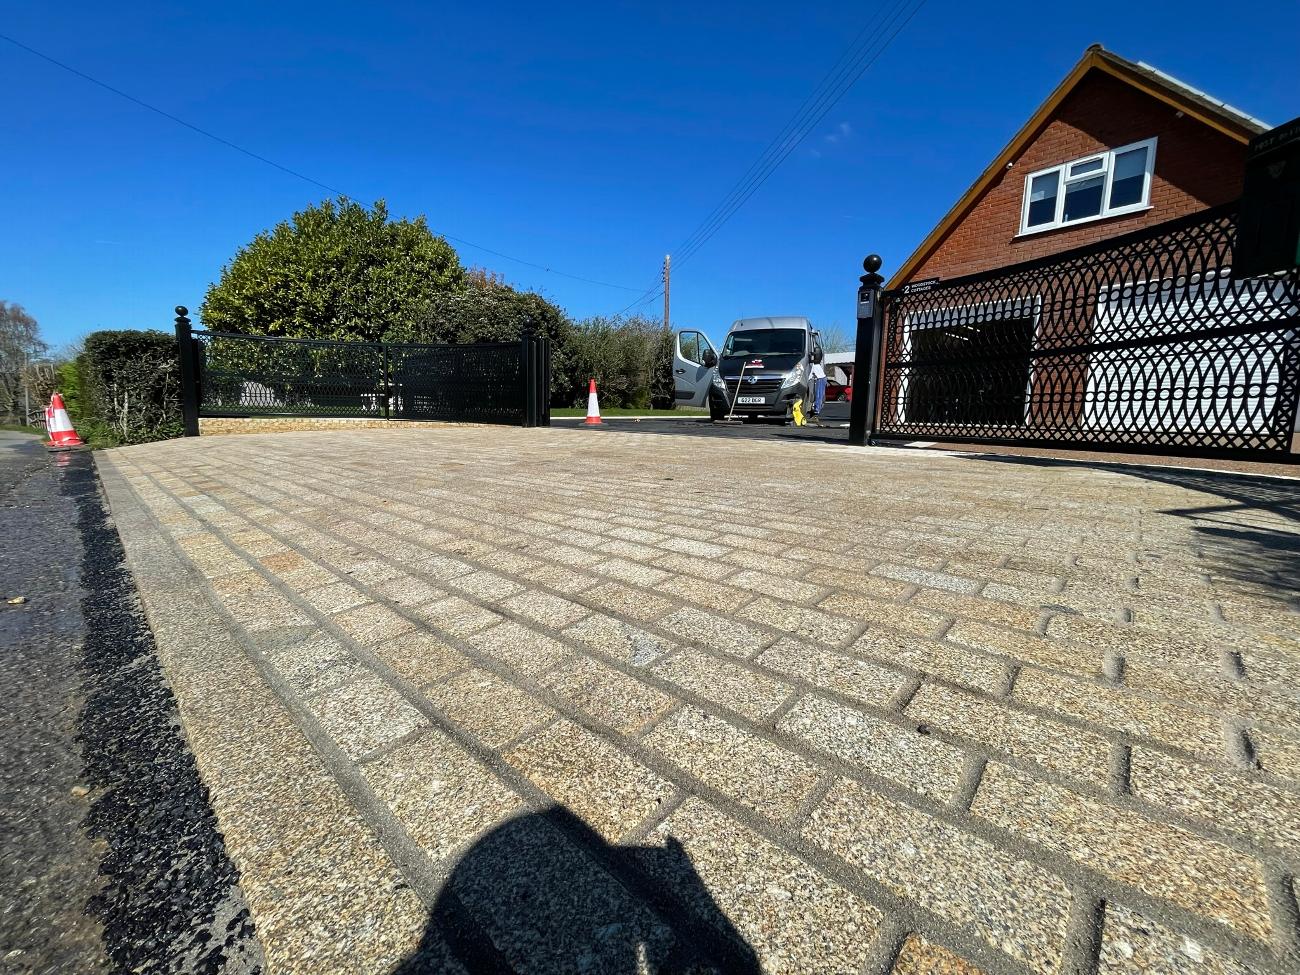 Additional Services | DGR Surfaces | Resin Driveways in Kent gallery image 10